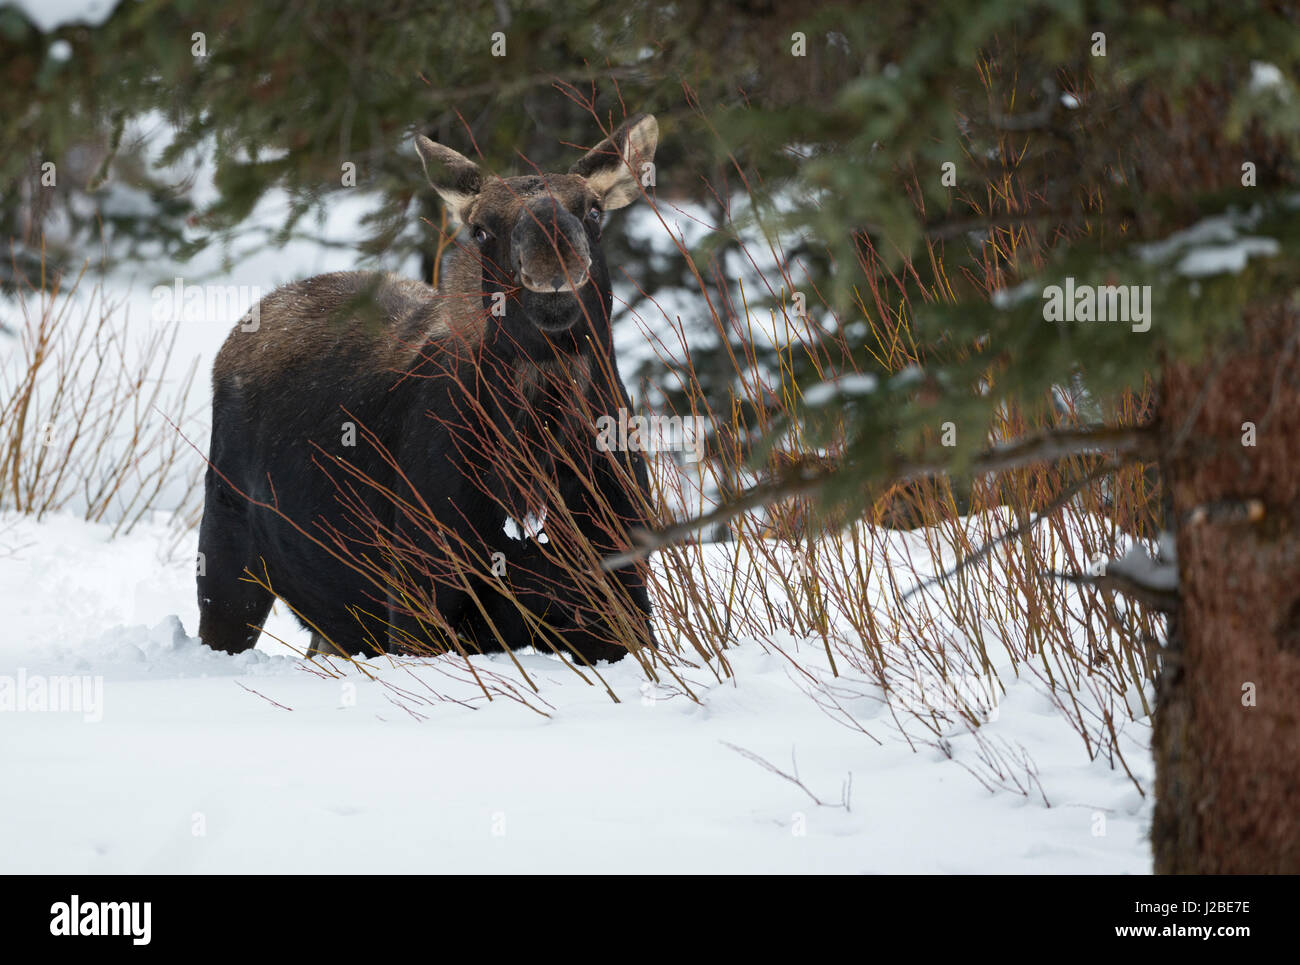 Moose / Elch ( Alces alces ) in winter, deep snow, young bull, lost antlers, feeding on bushes, game browsing, looks funny, Yellowstone NP, Wyoming, U Stock Photo